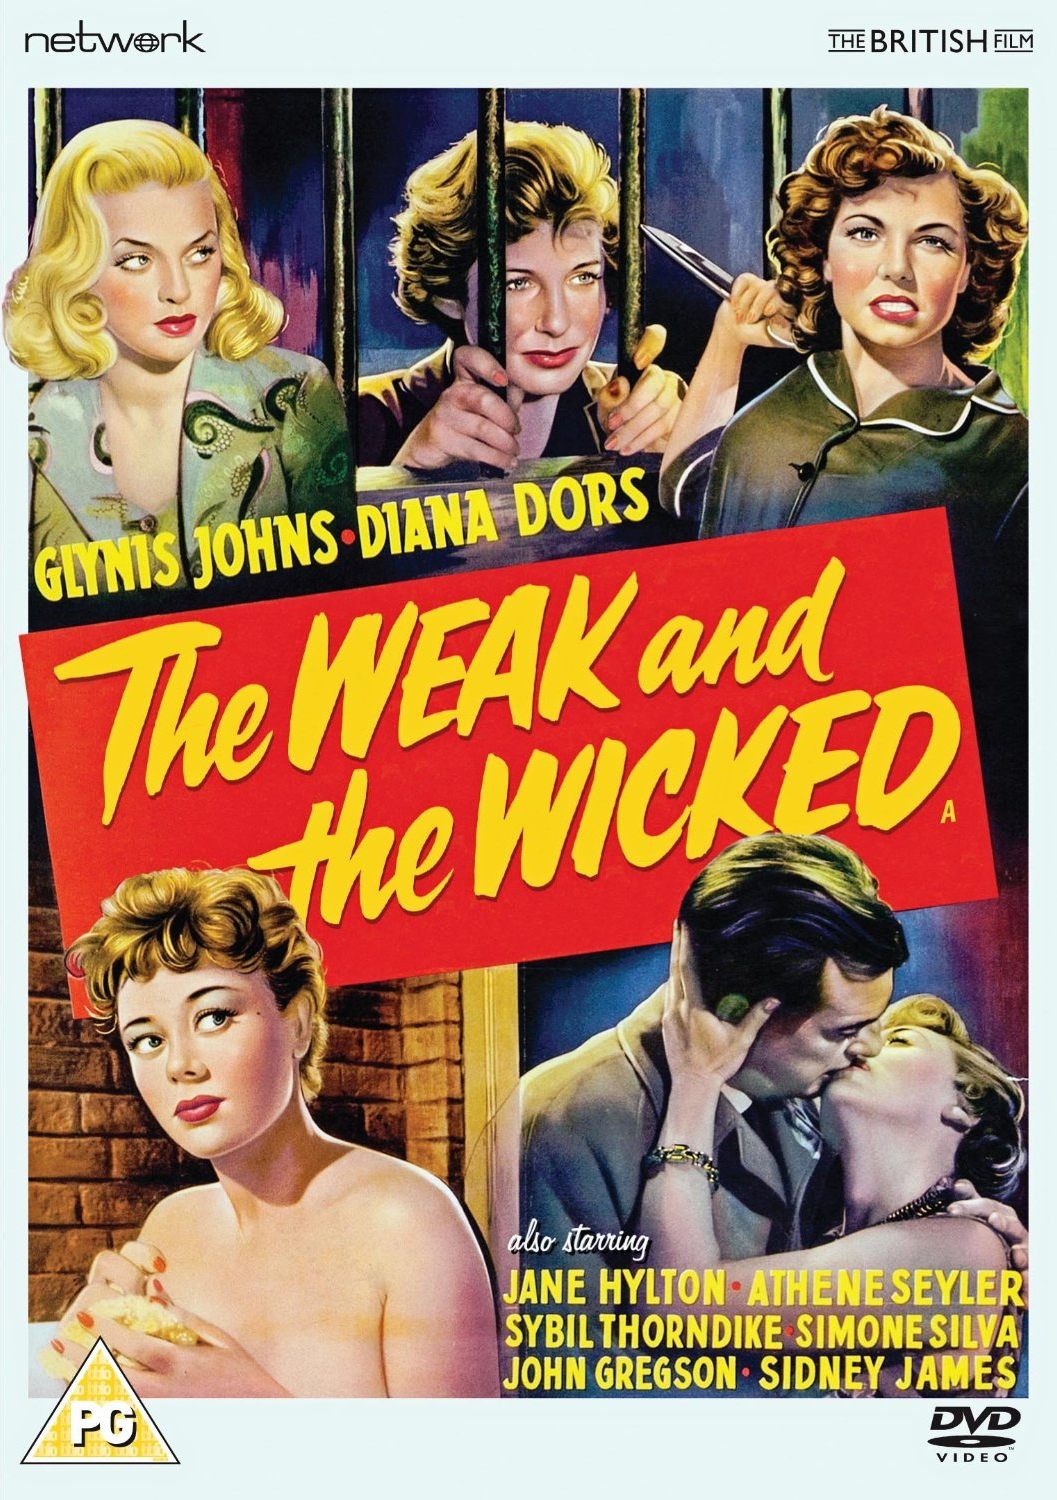 The Weak and the Wicked DVD from Network and The British Film.  Features Glynis Johns as Jean Raymond.